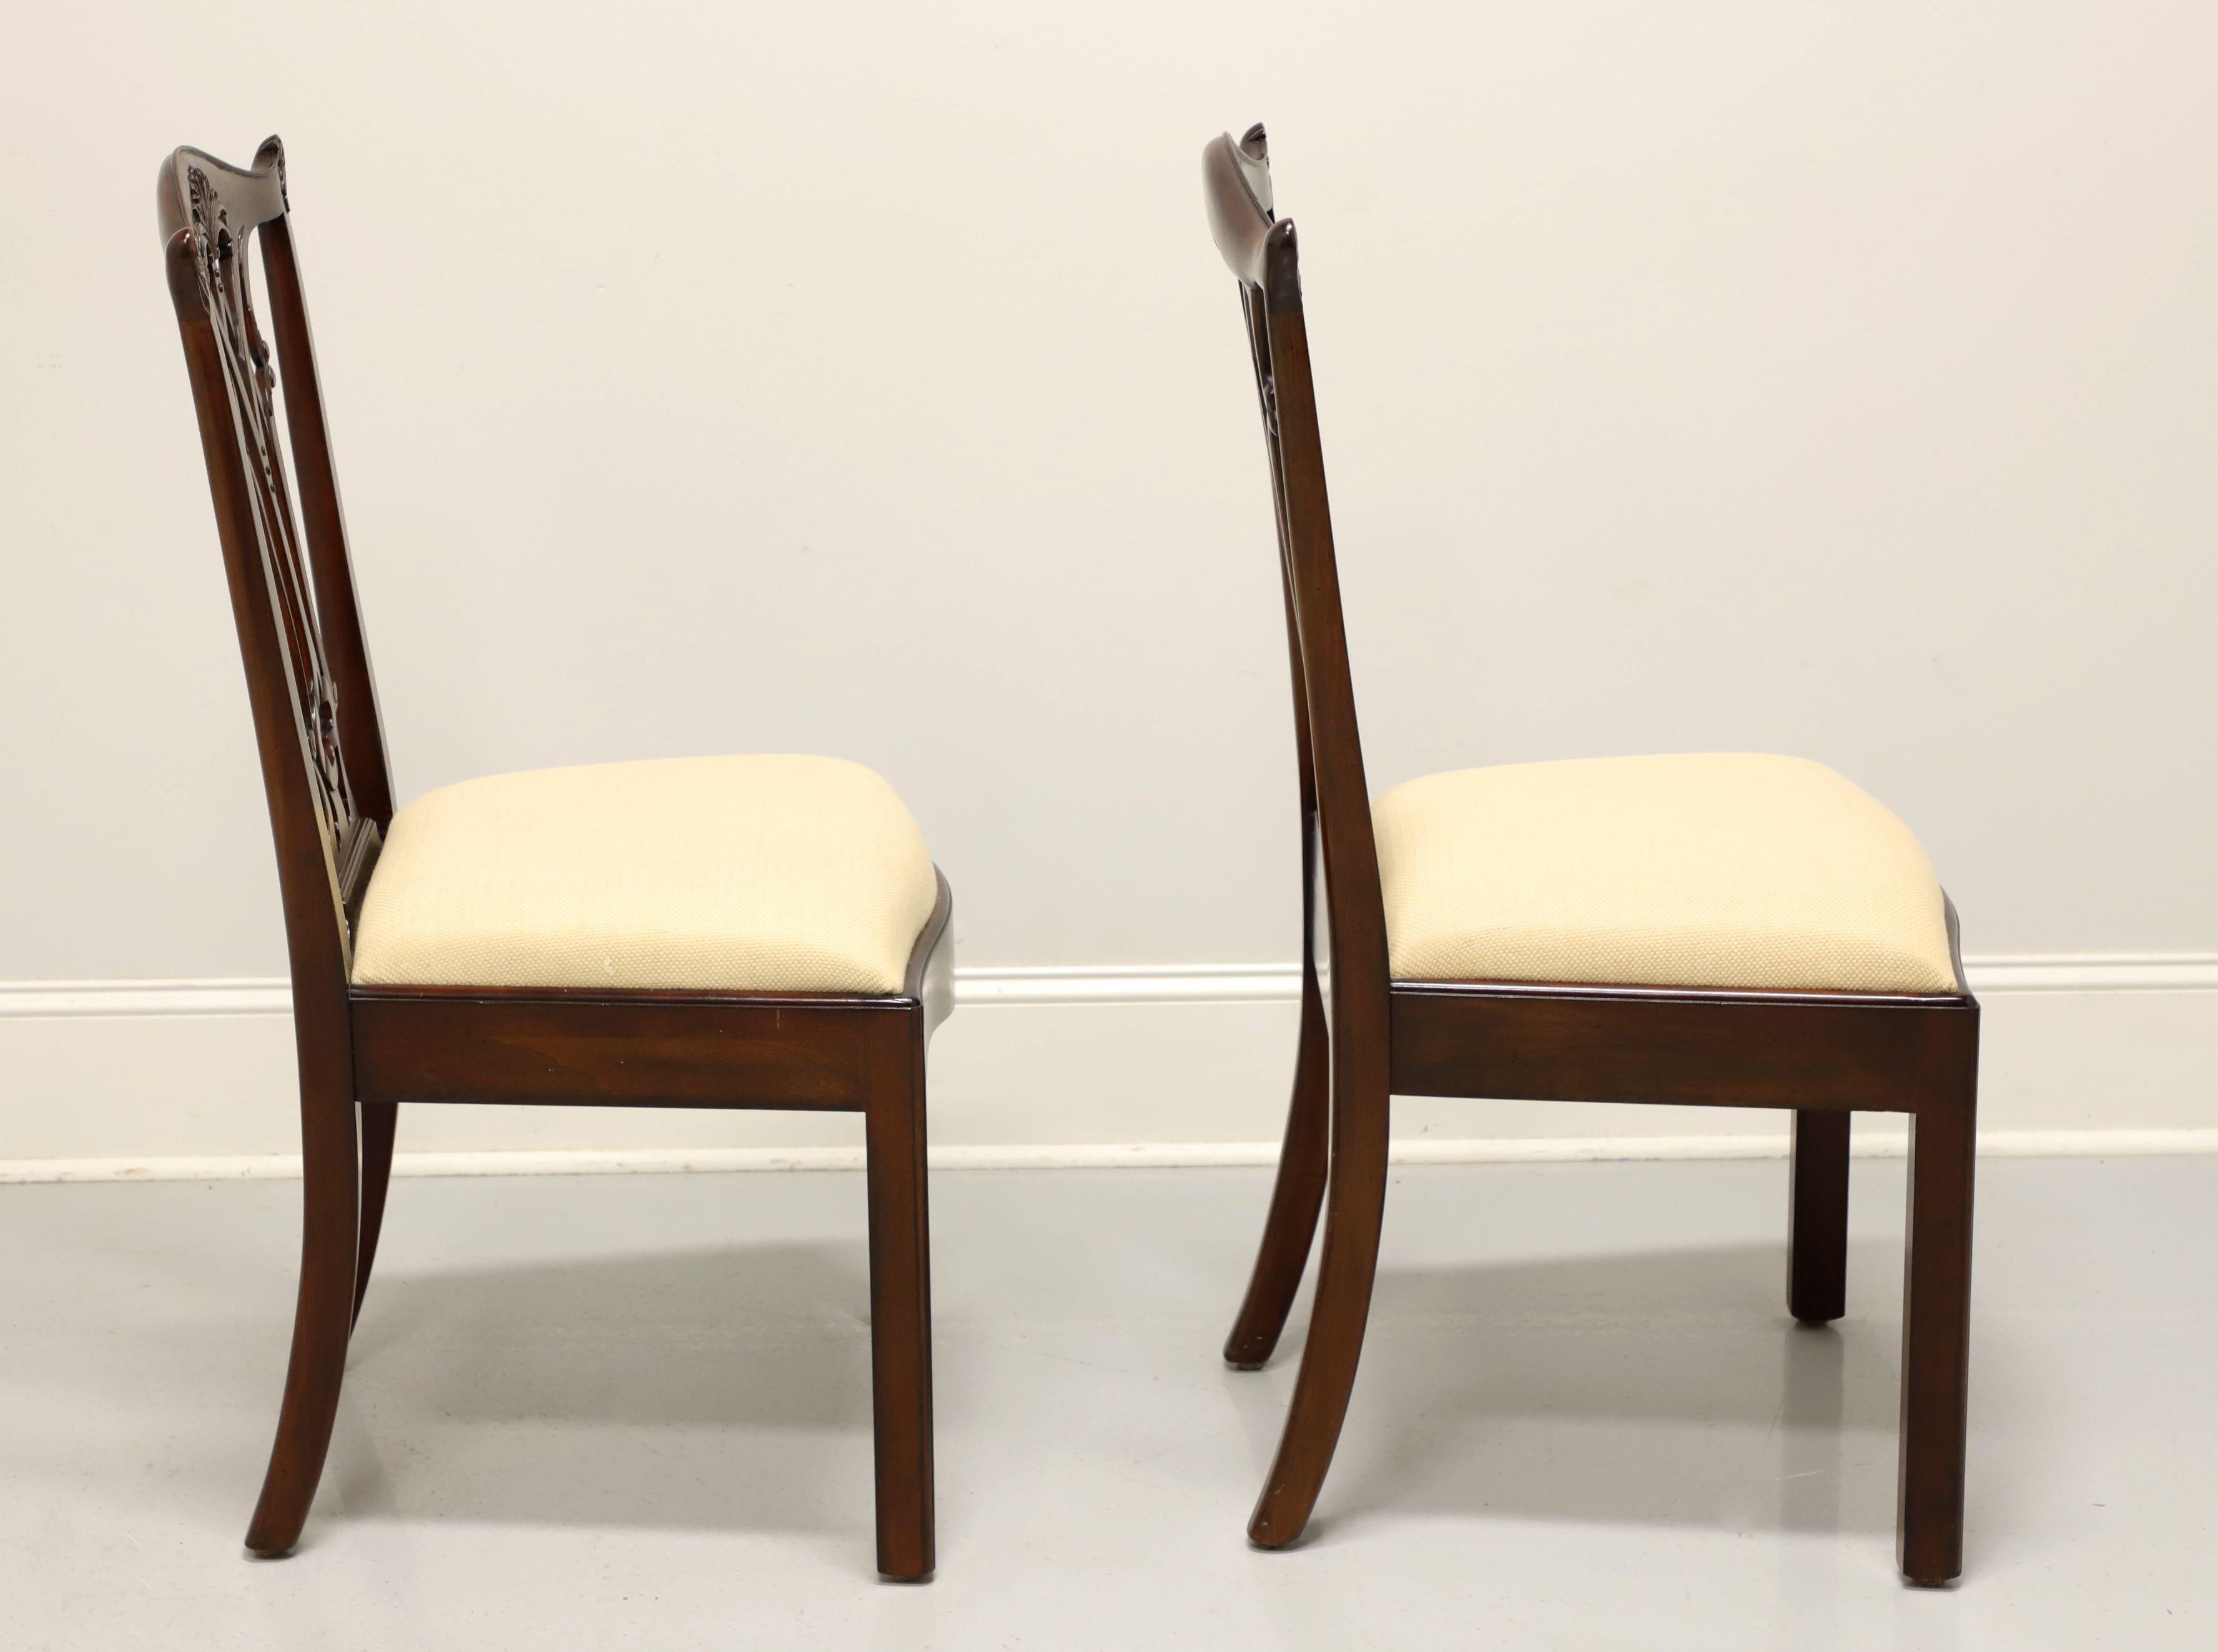 Philippine MAITLAND SMITH Connecticut Regency Mahogany Dining Side Chairs - Pair C